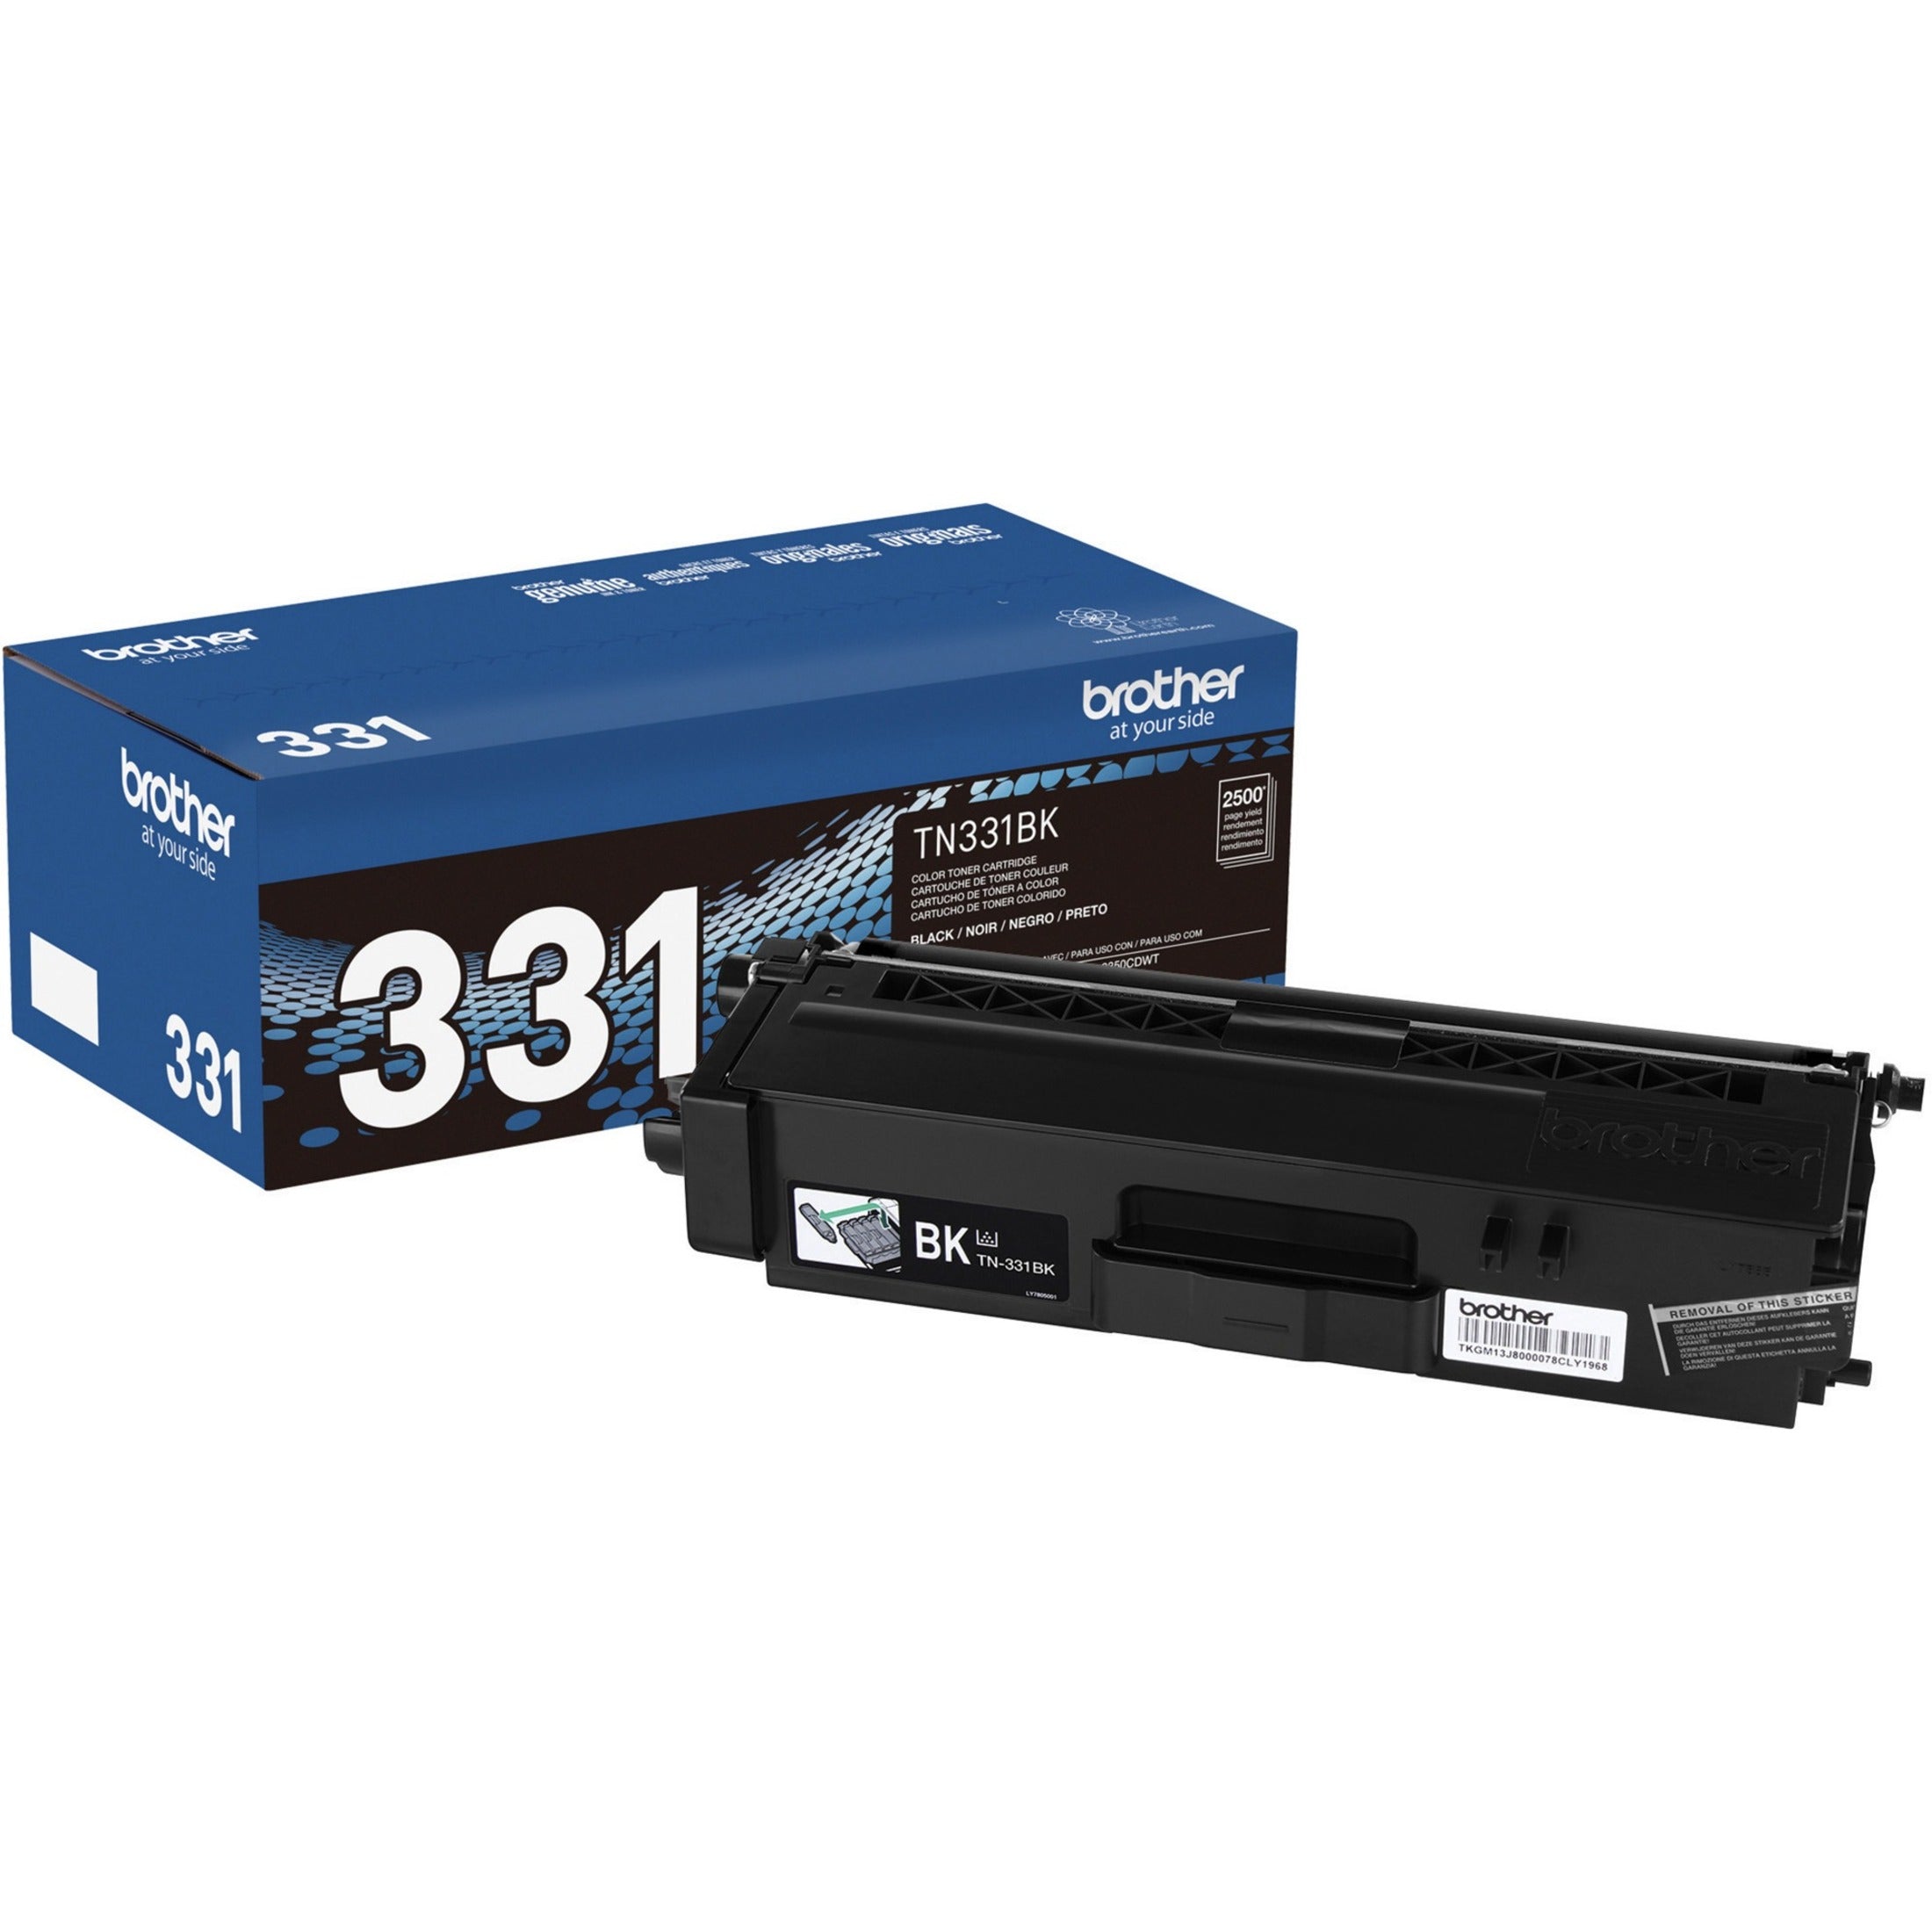 Brother TN331BK Toner Cartridge, 2500 Pages Yield, Black